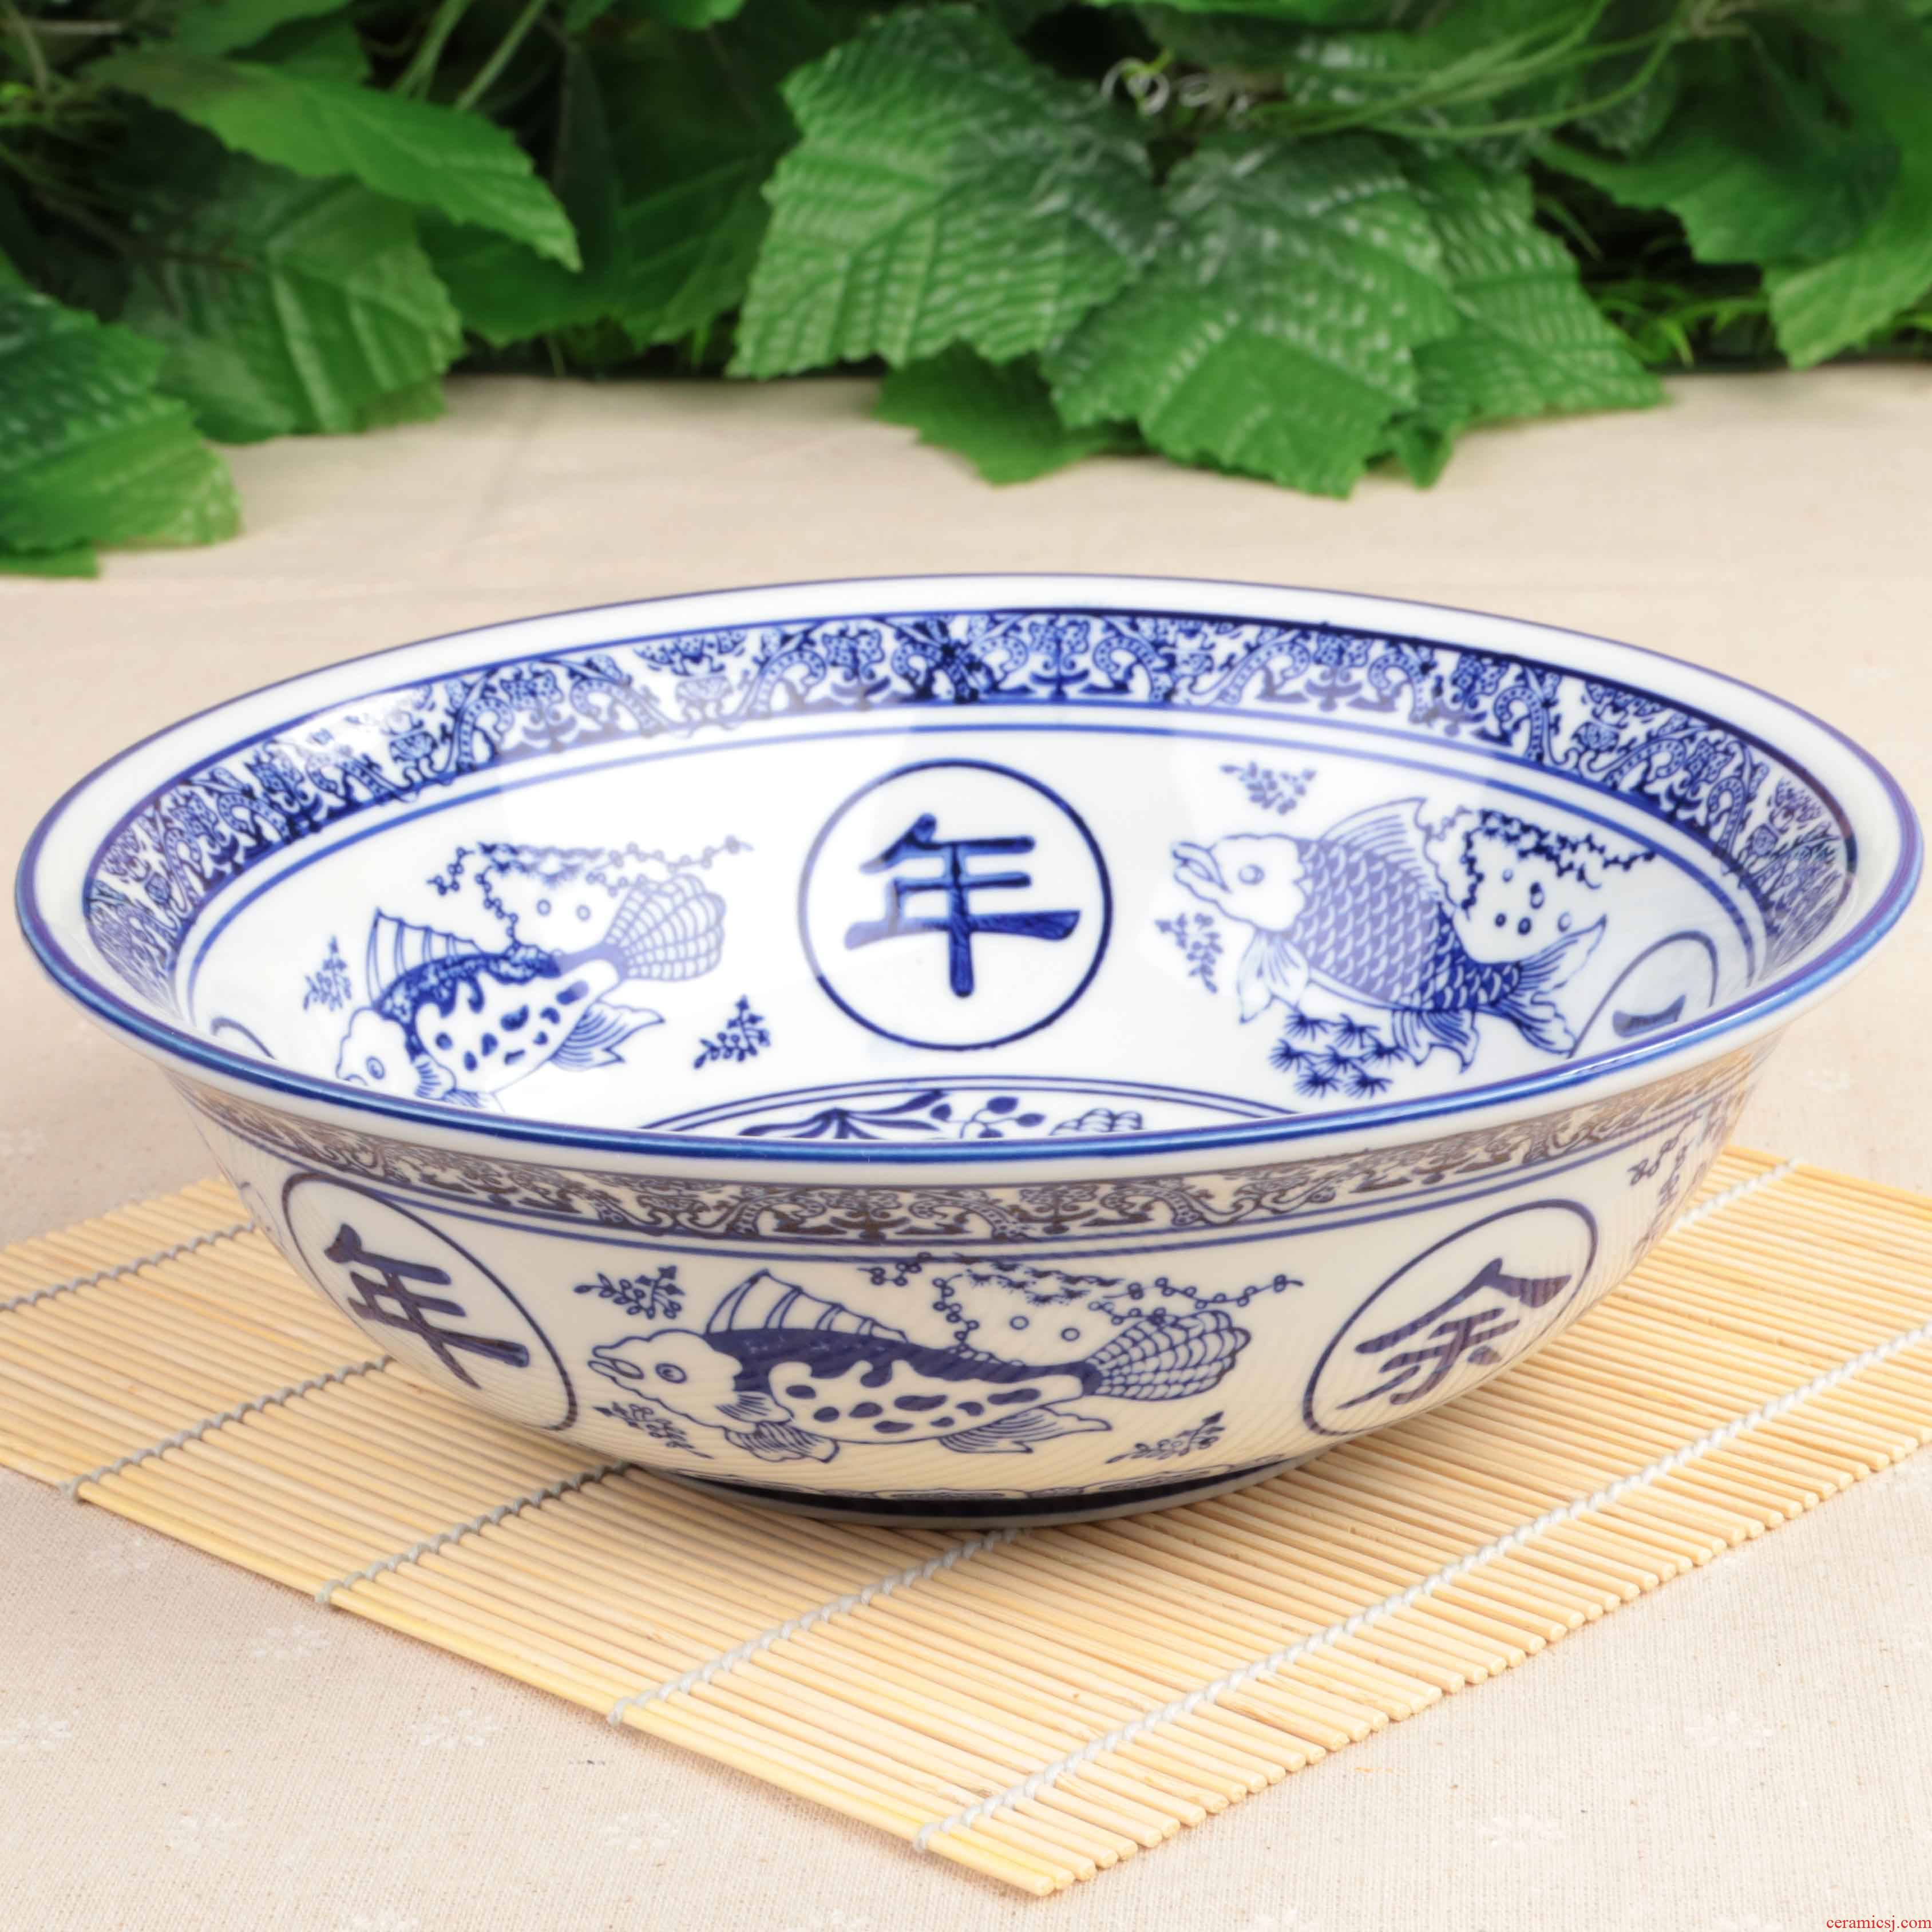 Blue and white ceramic packages mailed excessive penetration large bowl of boiled fish pickled fish meat boiled fish bowl bowl bathtub cubicle poon choi large bowl